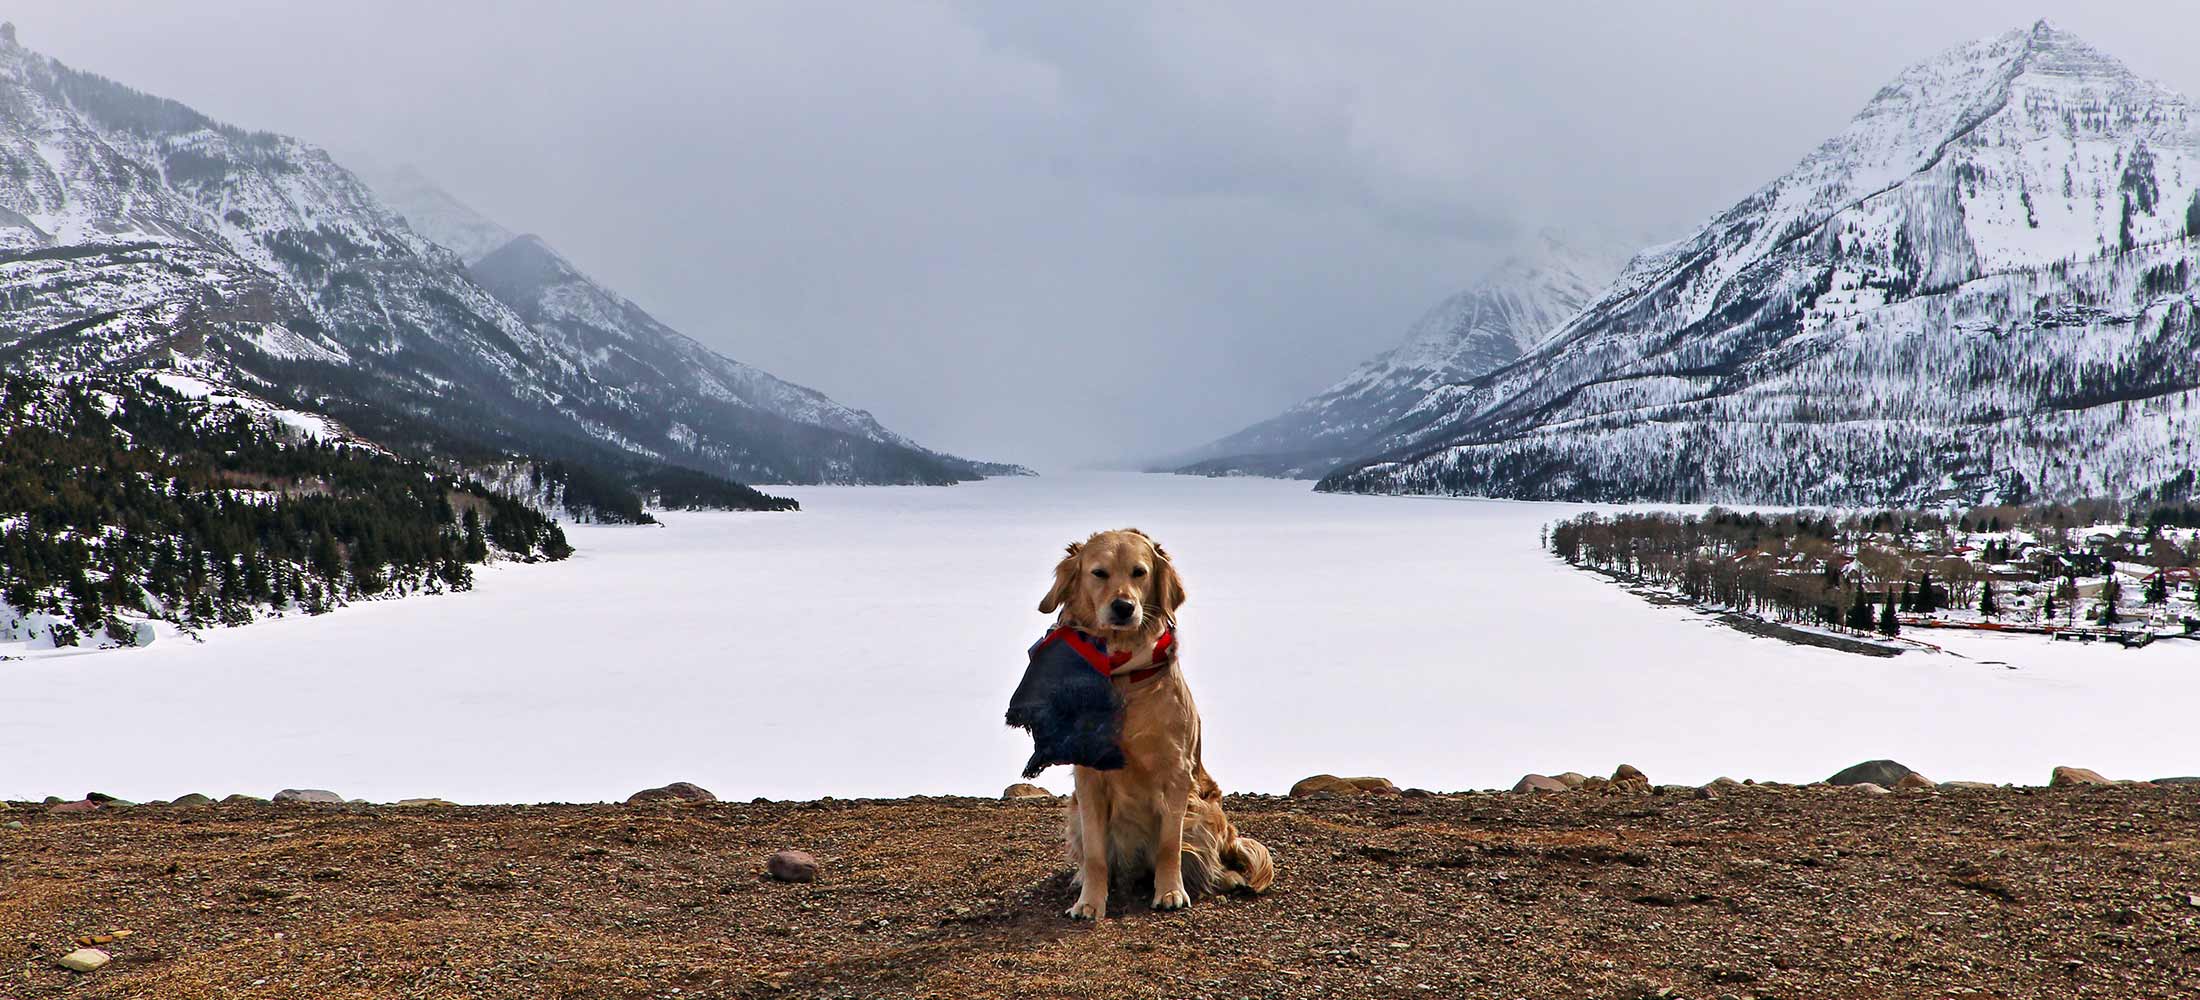 The goodest pupper poses for beautiful mountain photo in Waterton Lakes National Park